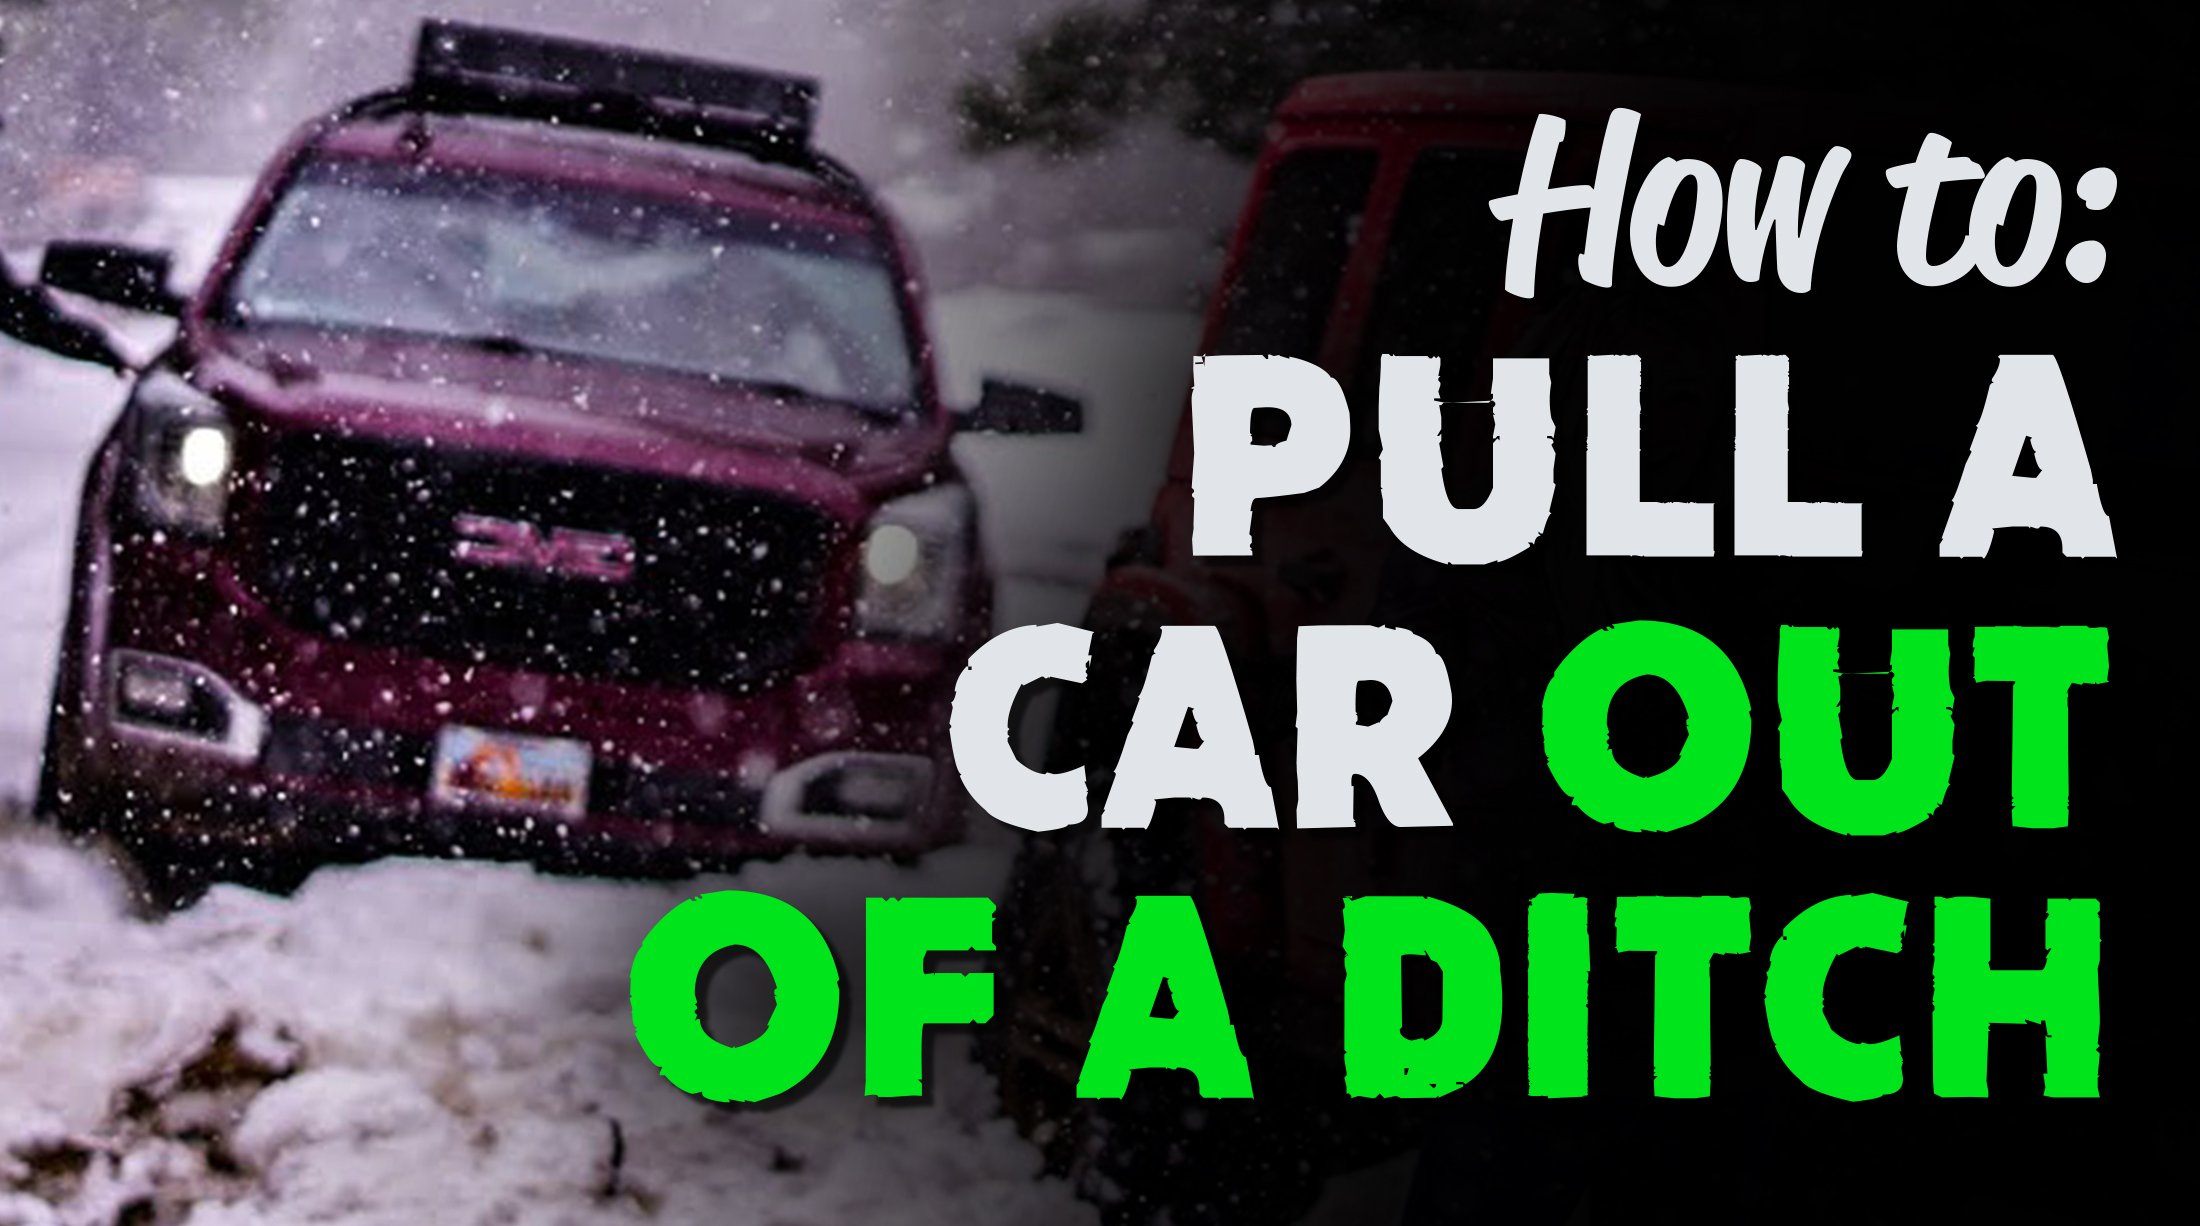 How to Pull a Car Out of a Ditch